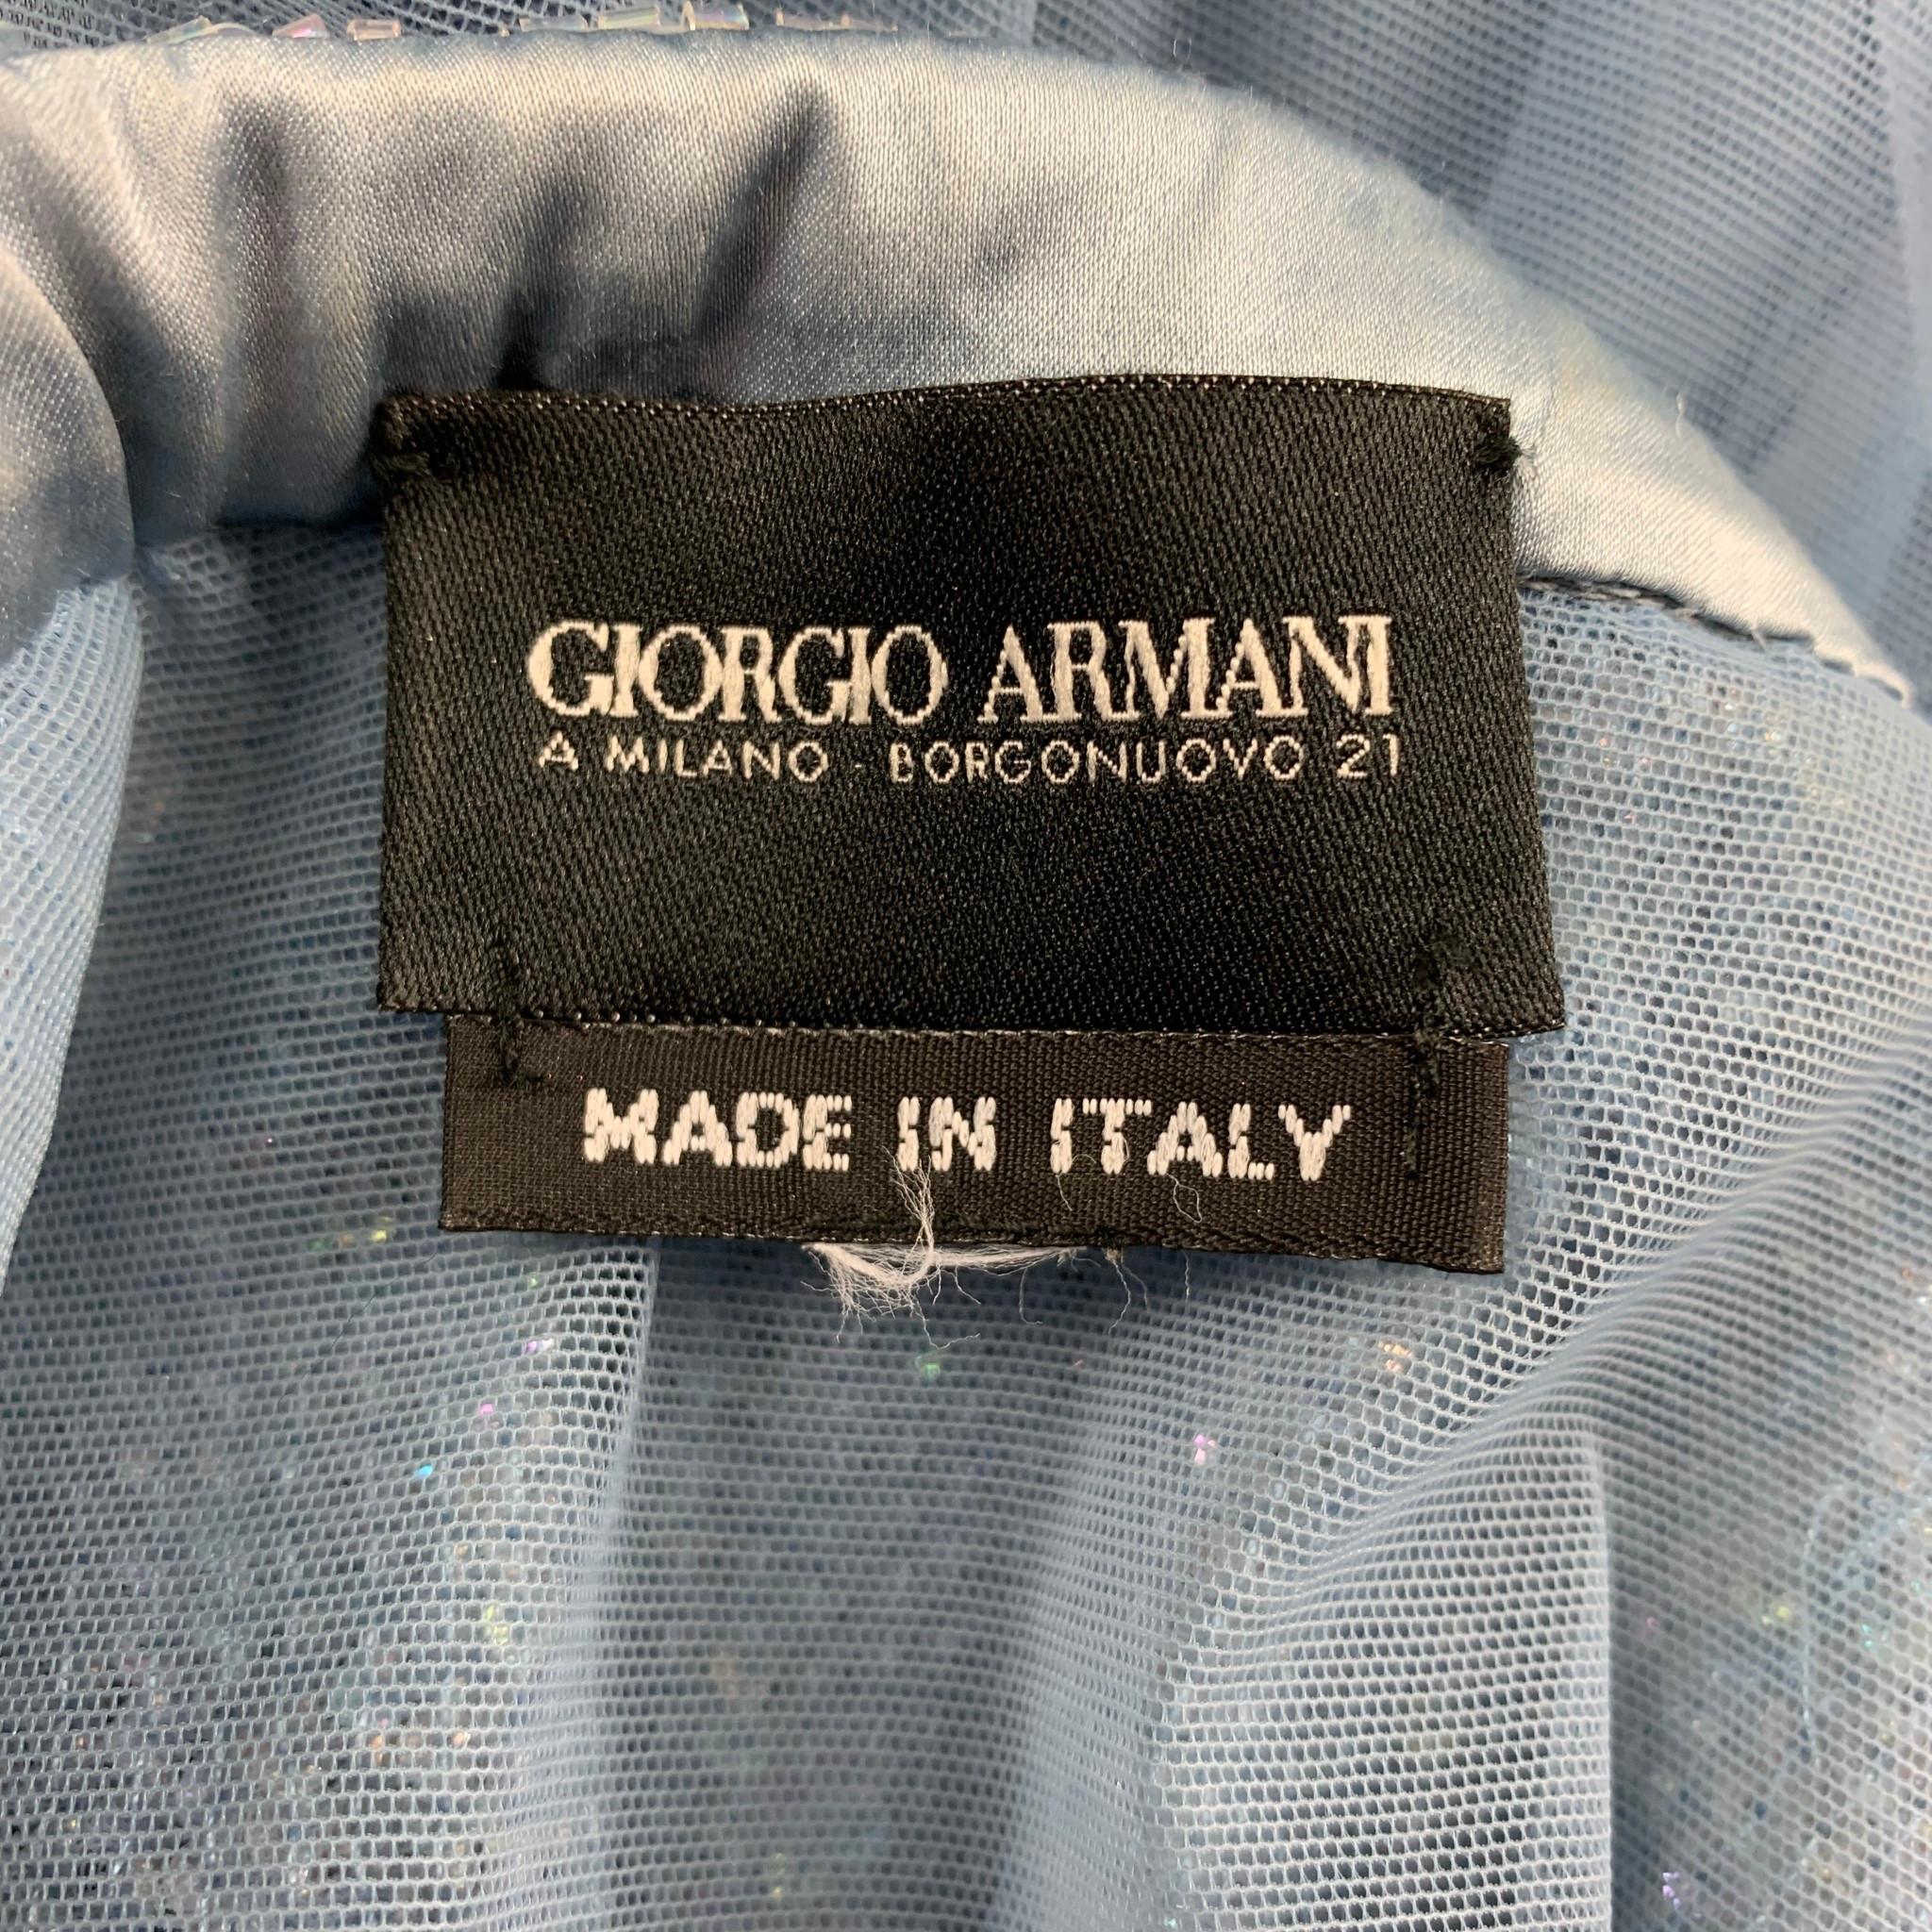 Vintage GIORGIO ARMANI body suit comes in a light blue beaded material with a mesh panel featuring side zipper and a snap button liner closure. Made in Italy.

Good Pre-Owned Condition. Missing size tag.

Measurements:

Bust: 34 in.
Length:  20.5